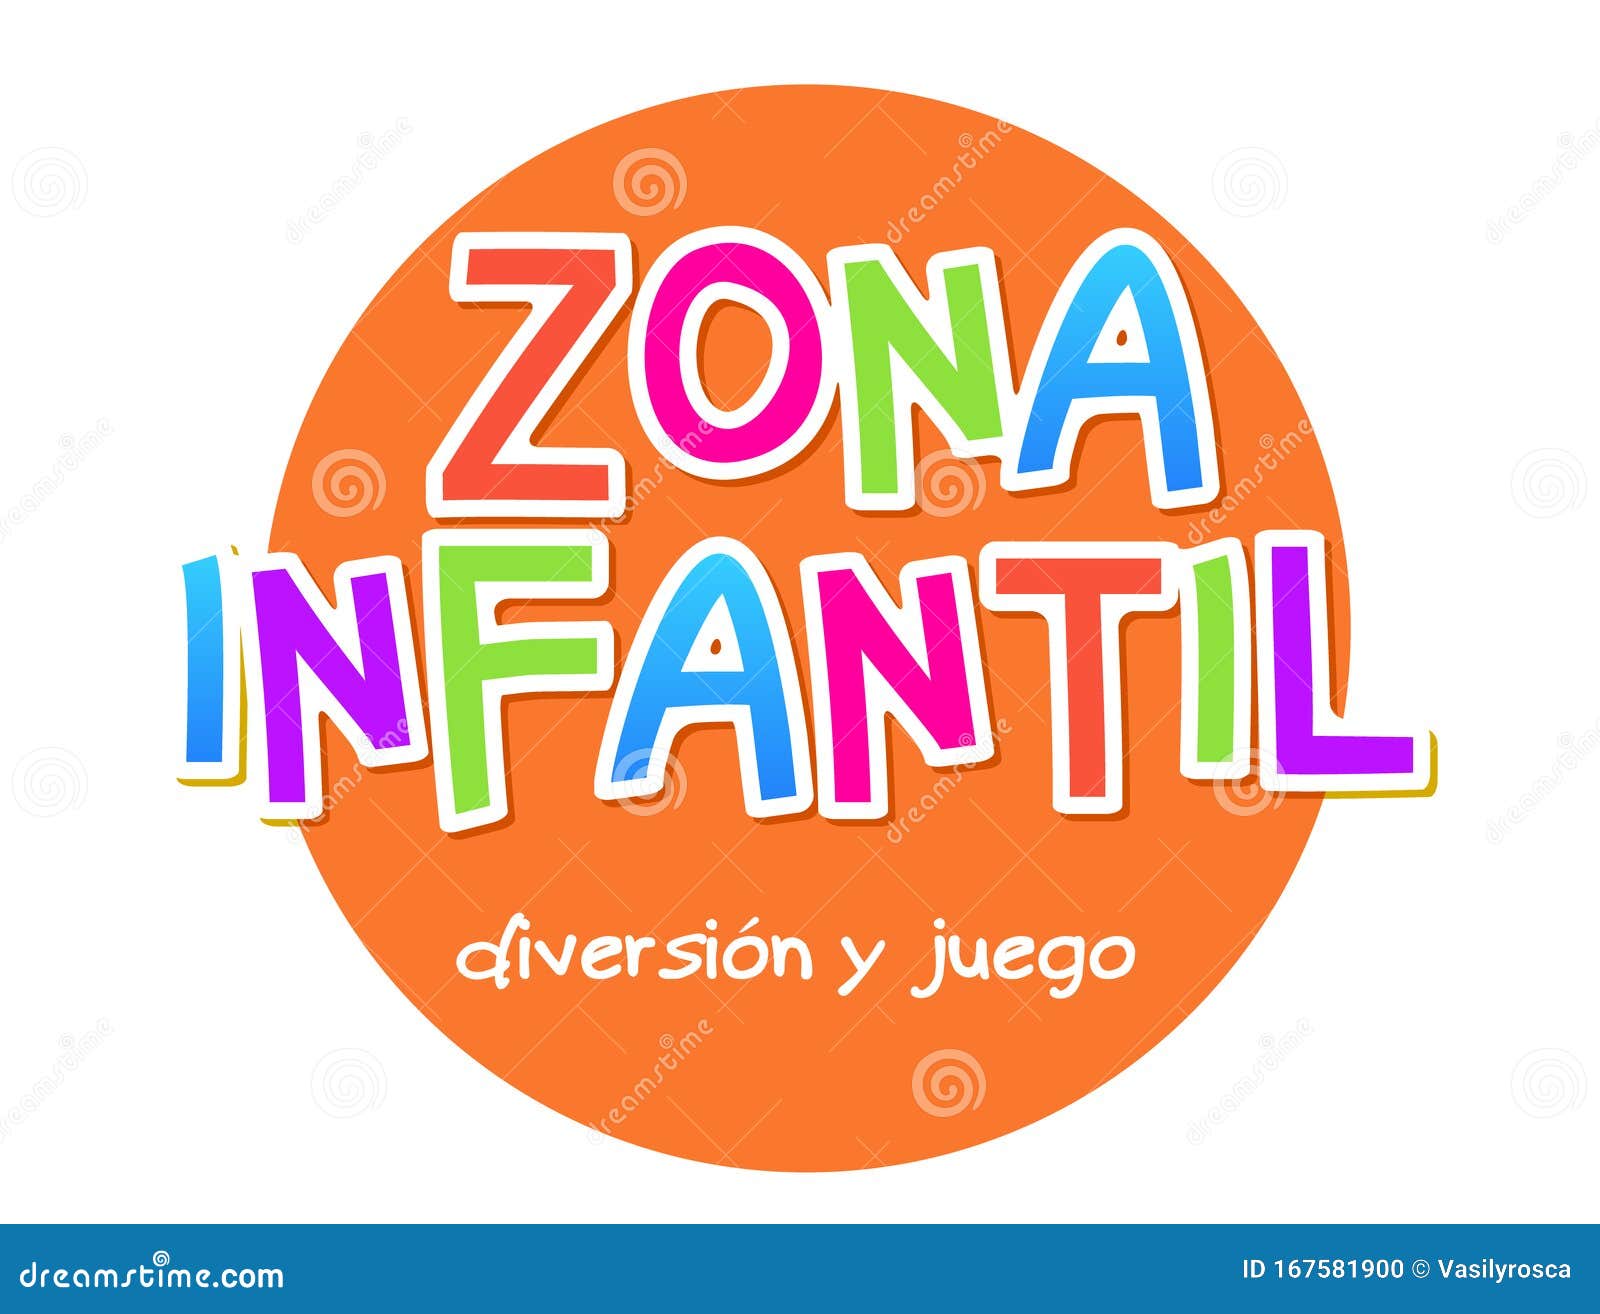 kids zone - zona infantil game banner  background. playground  child zone sign. childhood fun room area